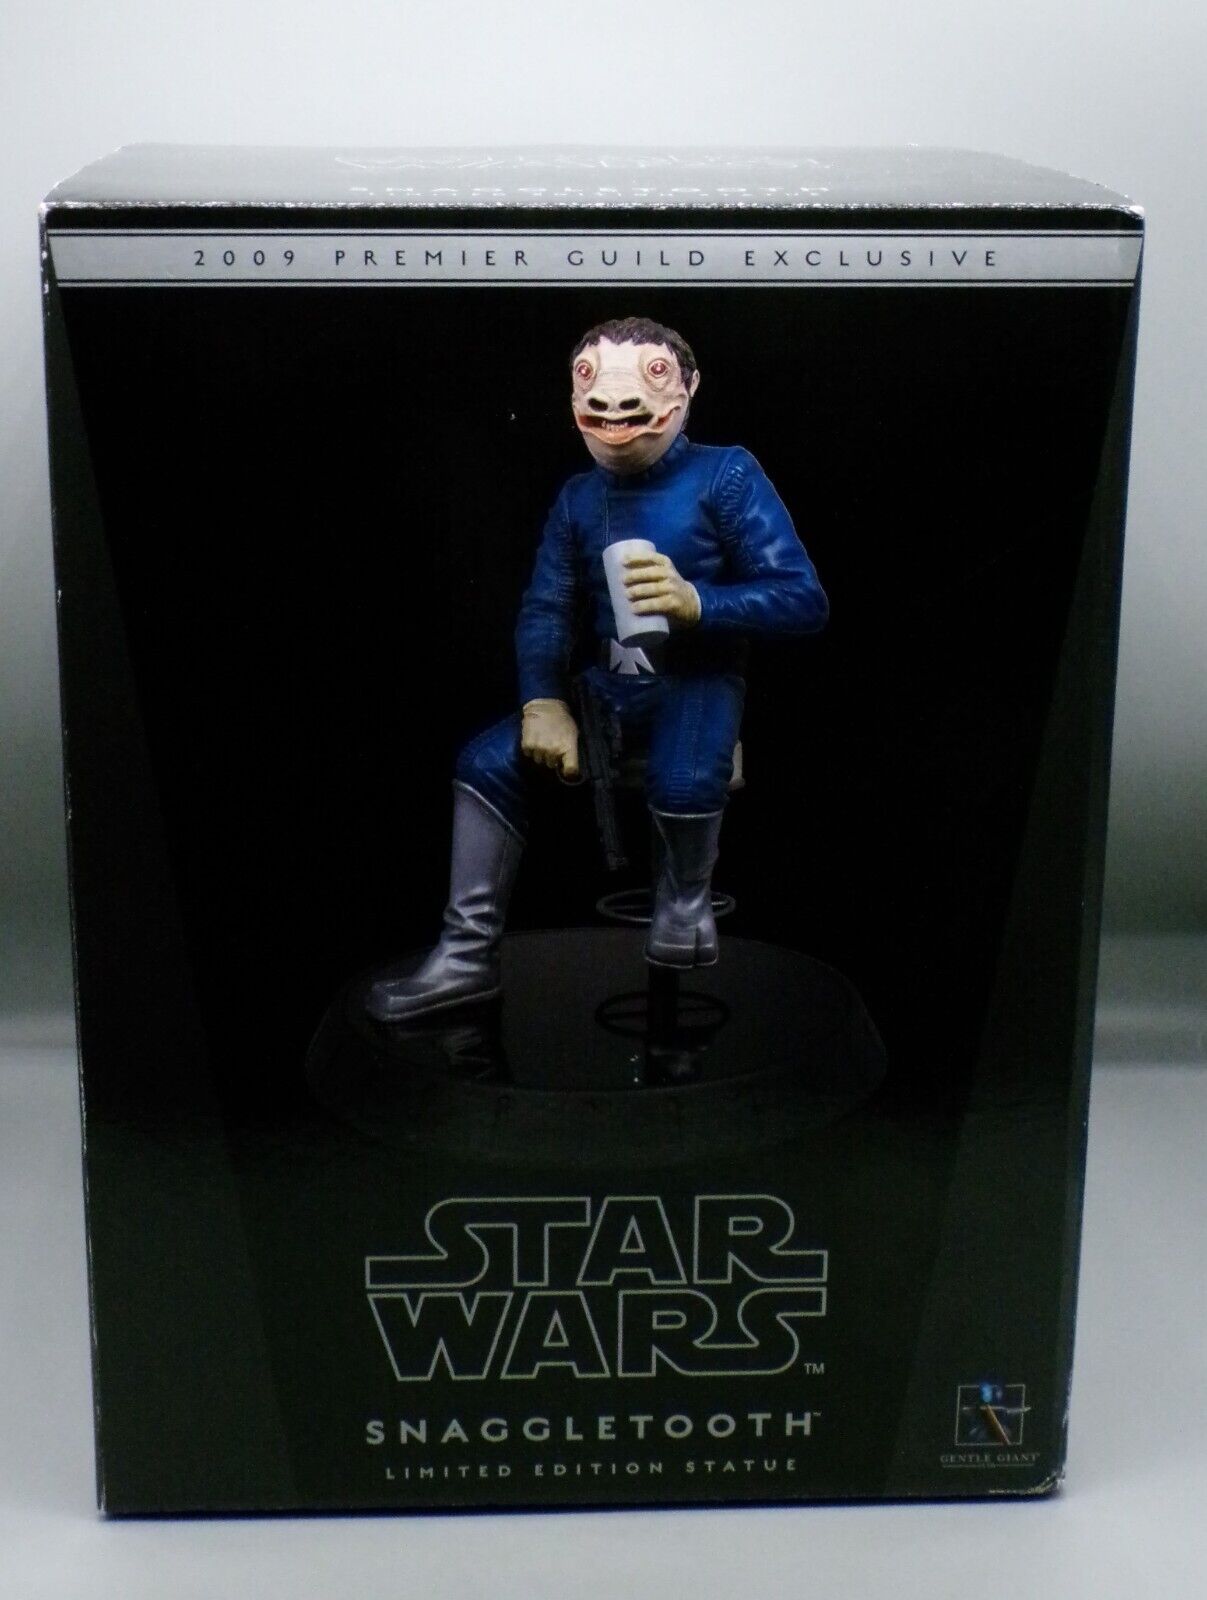 2009 Gentle Giant STAR WARS Blue Snaggletooth Statue PGM Exclusive 201 / 400 